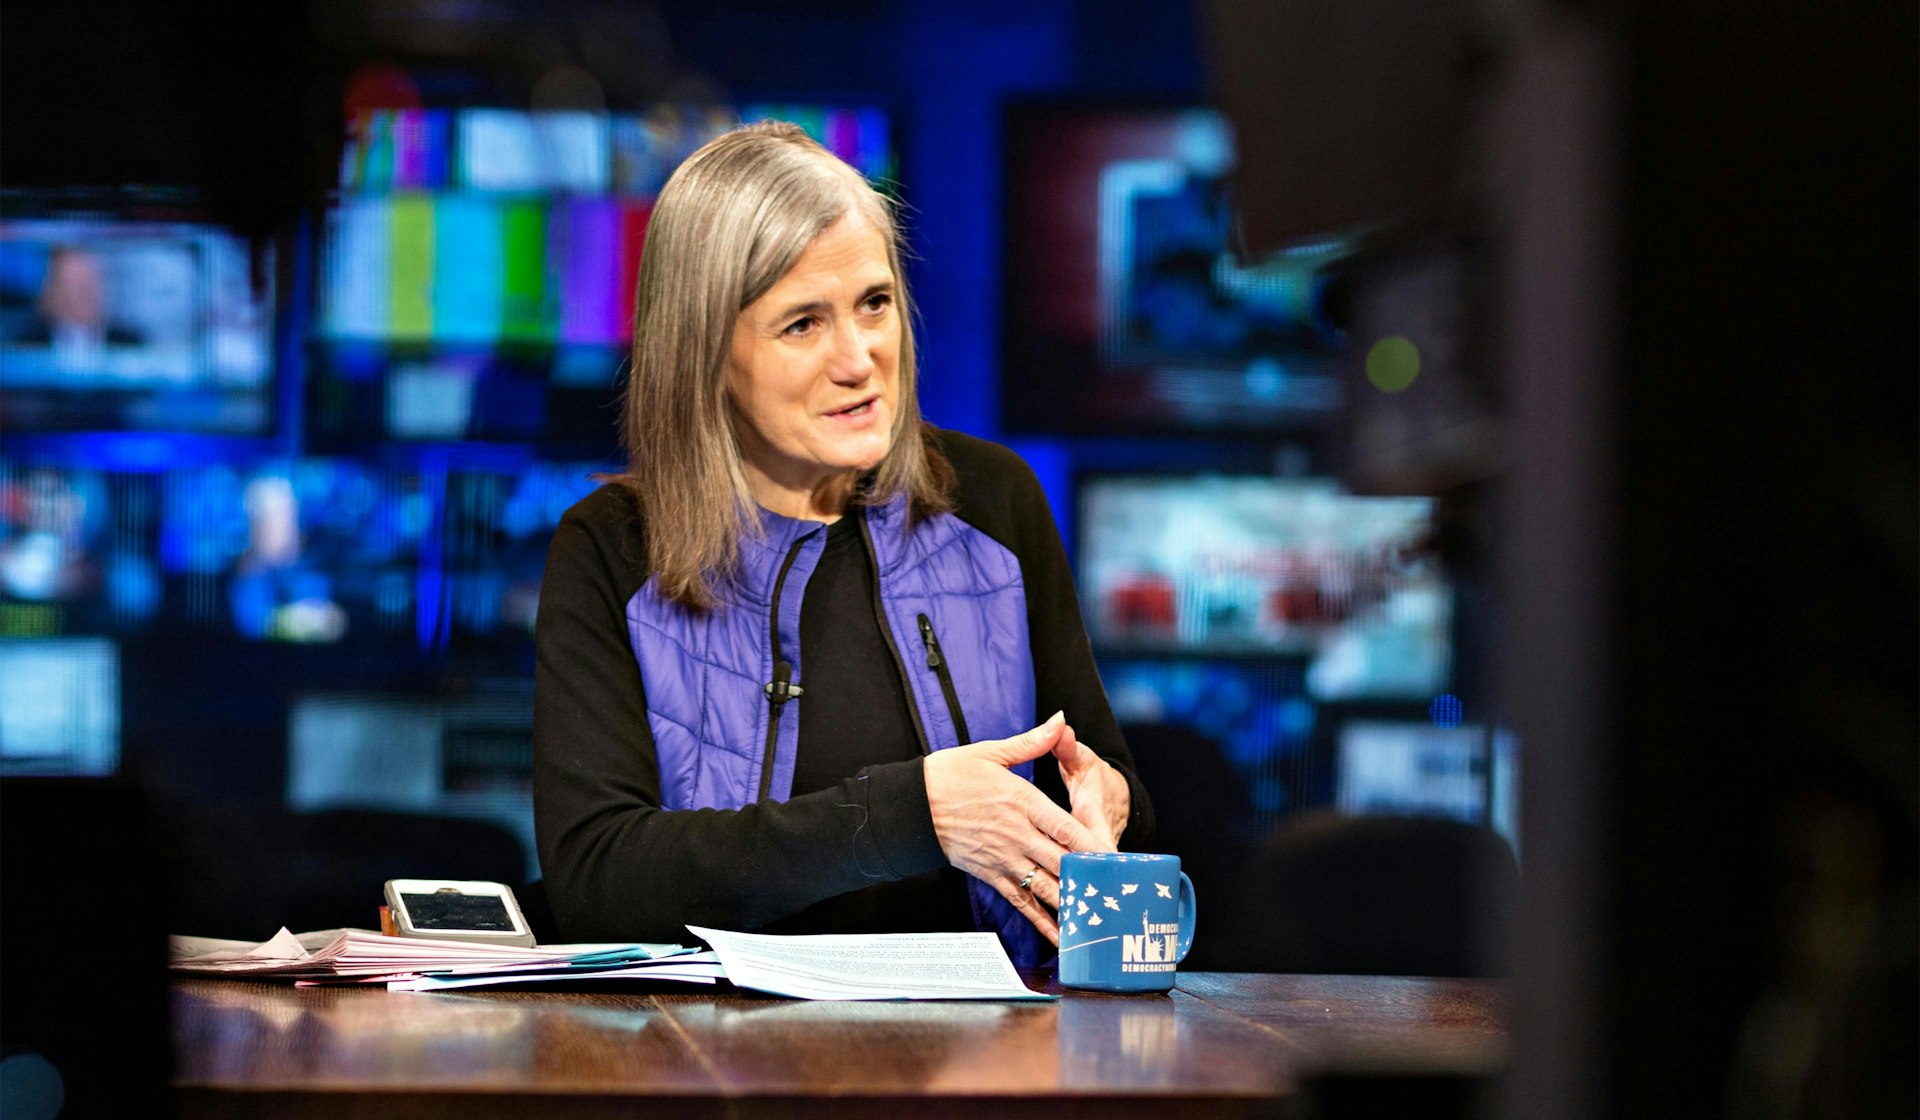 Amy Goodman's rallying cry for engaged young people